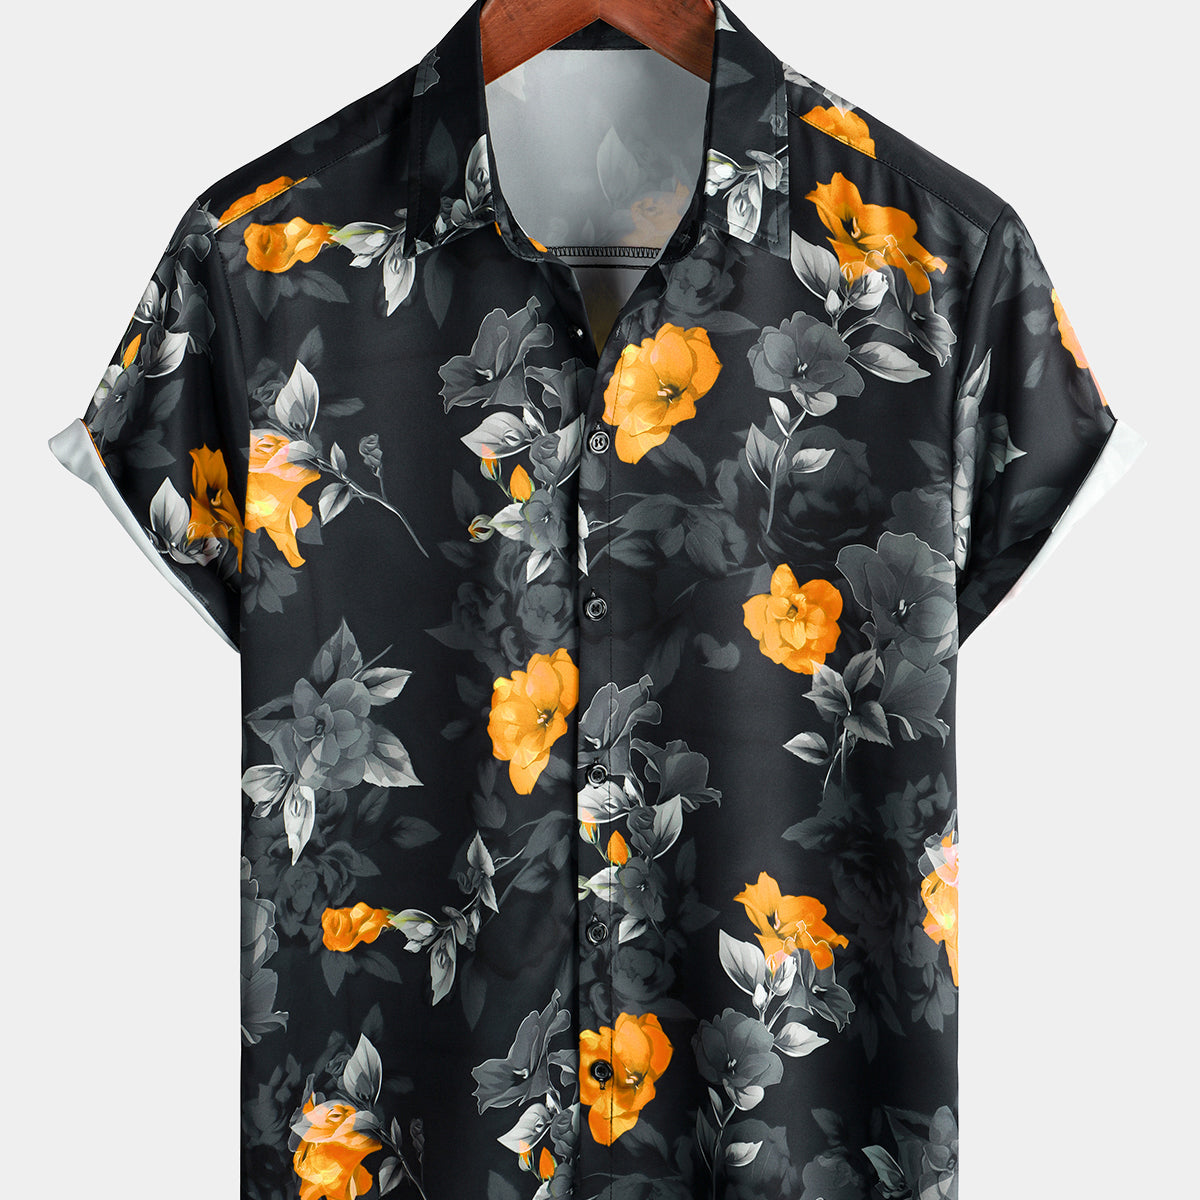 Men's Summer Casual Yellow Floral Button Up Short Sleeve Holiday Cool Beach Shirt